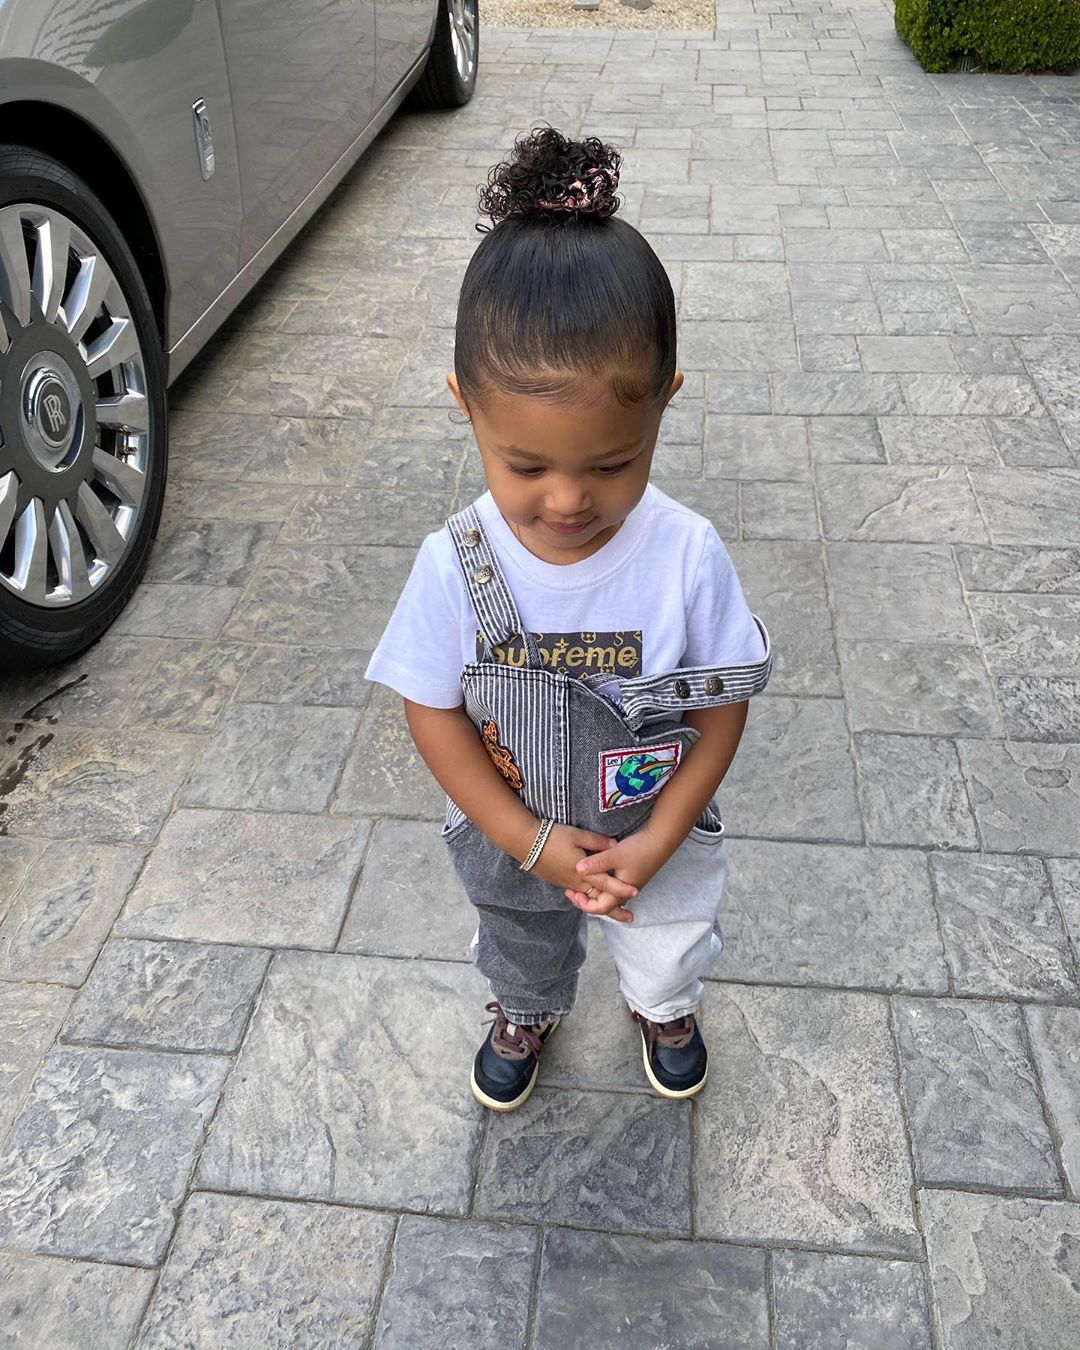 Stormi Webster Photos See the Cutest Pics of Kylie Jenner's Daughter